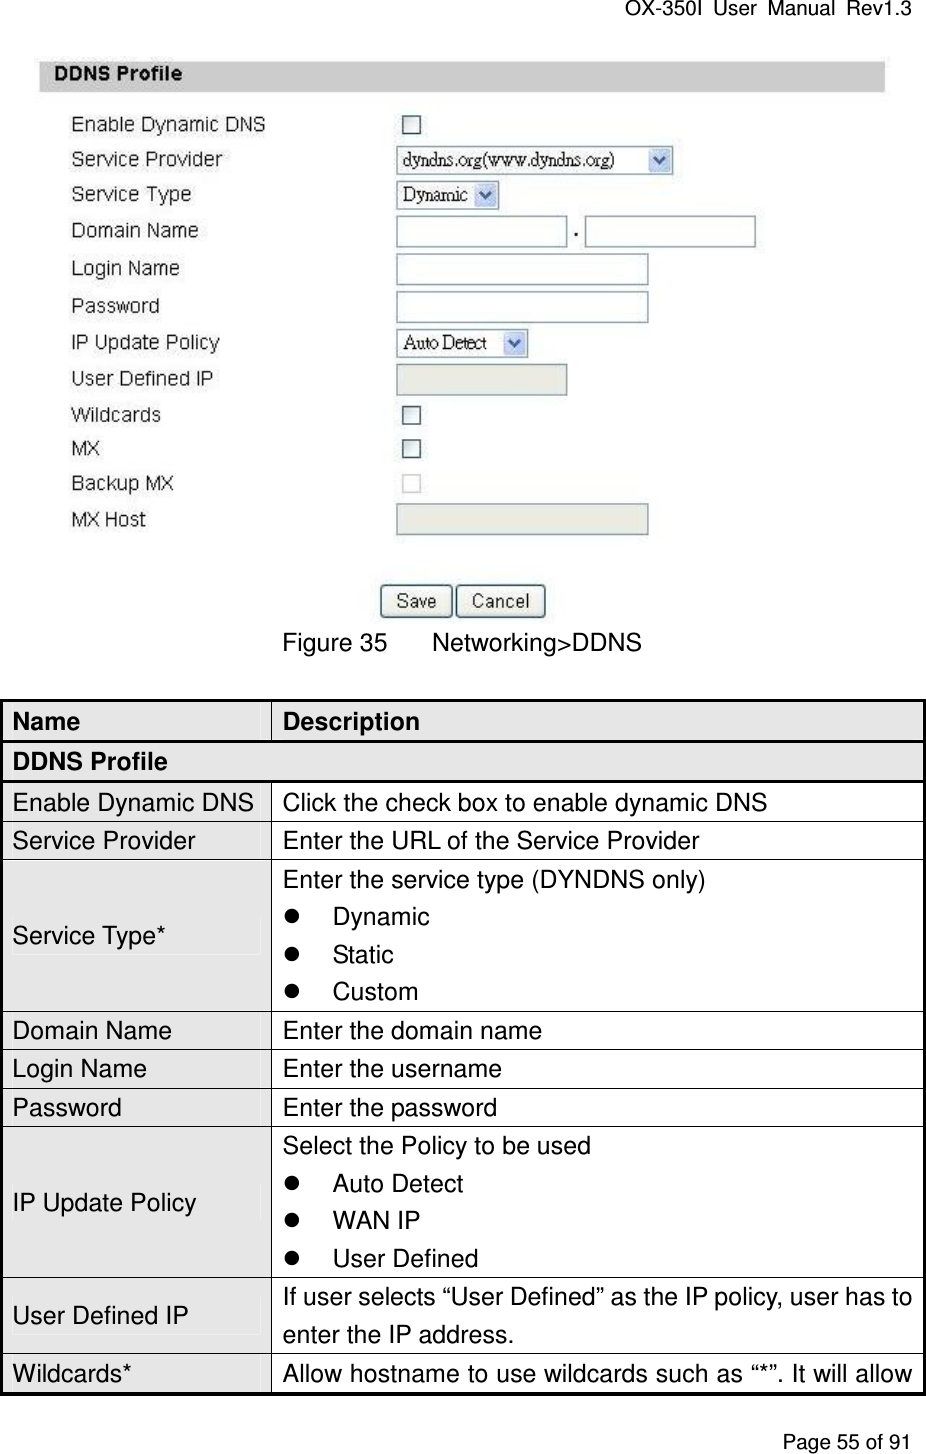 OX-350I  User  Manual  Rev1.3 Page 55 of 91  Figure 35  Networking&gt;DDNS Name  Description DDNS Profile Enable Dynamic DNS Click the check box to enable dynamic DNS Service Provider  Enter the URL of the Service Provider Service Type* Enter the service type (DYNDNS only)   Dynamic   Static   Custom Domain Name  Enter the domain name Login Name  Enter the username Password  Enter the password IP Update Policy Select the Policy to be used   Auto Detect   WAN IP   User Defined User Defined IP  If user selects “User Defined” as the IP policy, user has to enter the IP address. Wildcards*  Allow hostname to use wildcards such as “*”. It will allow 